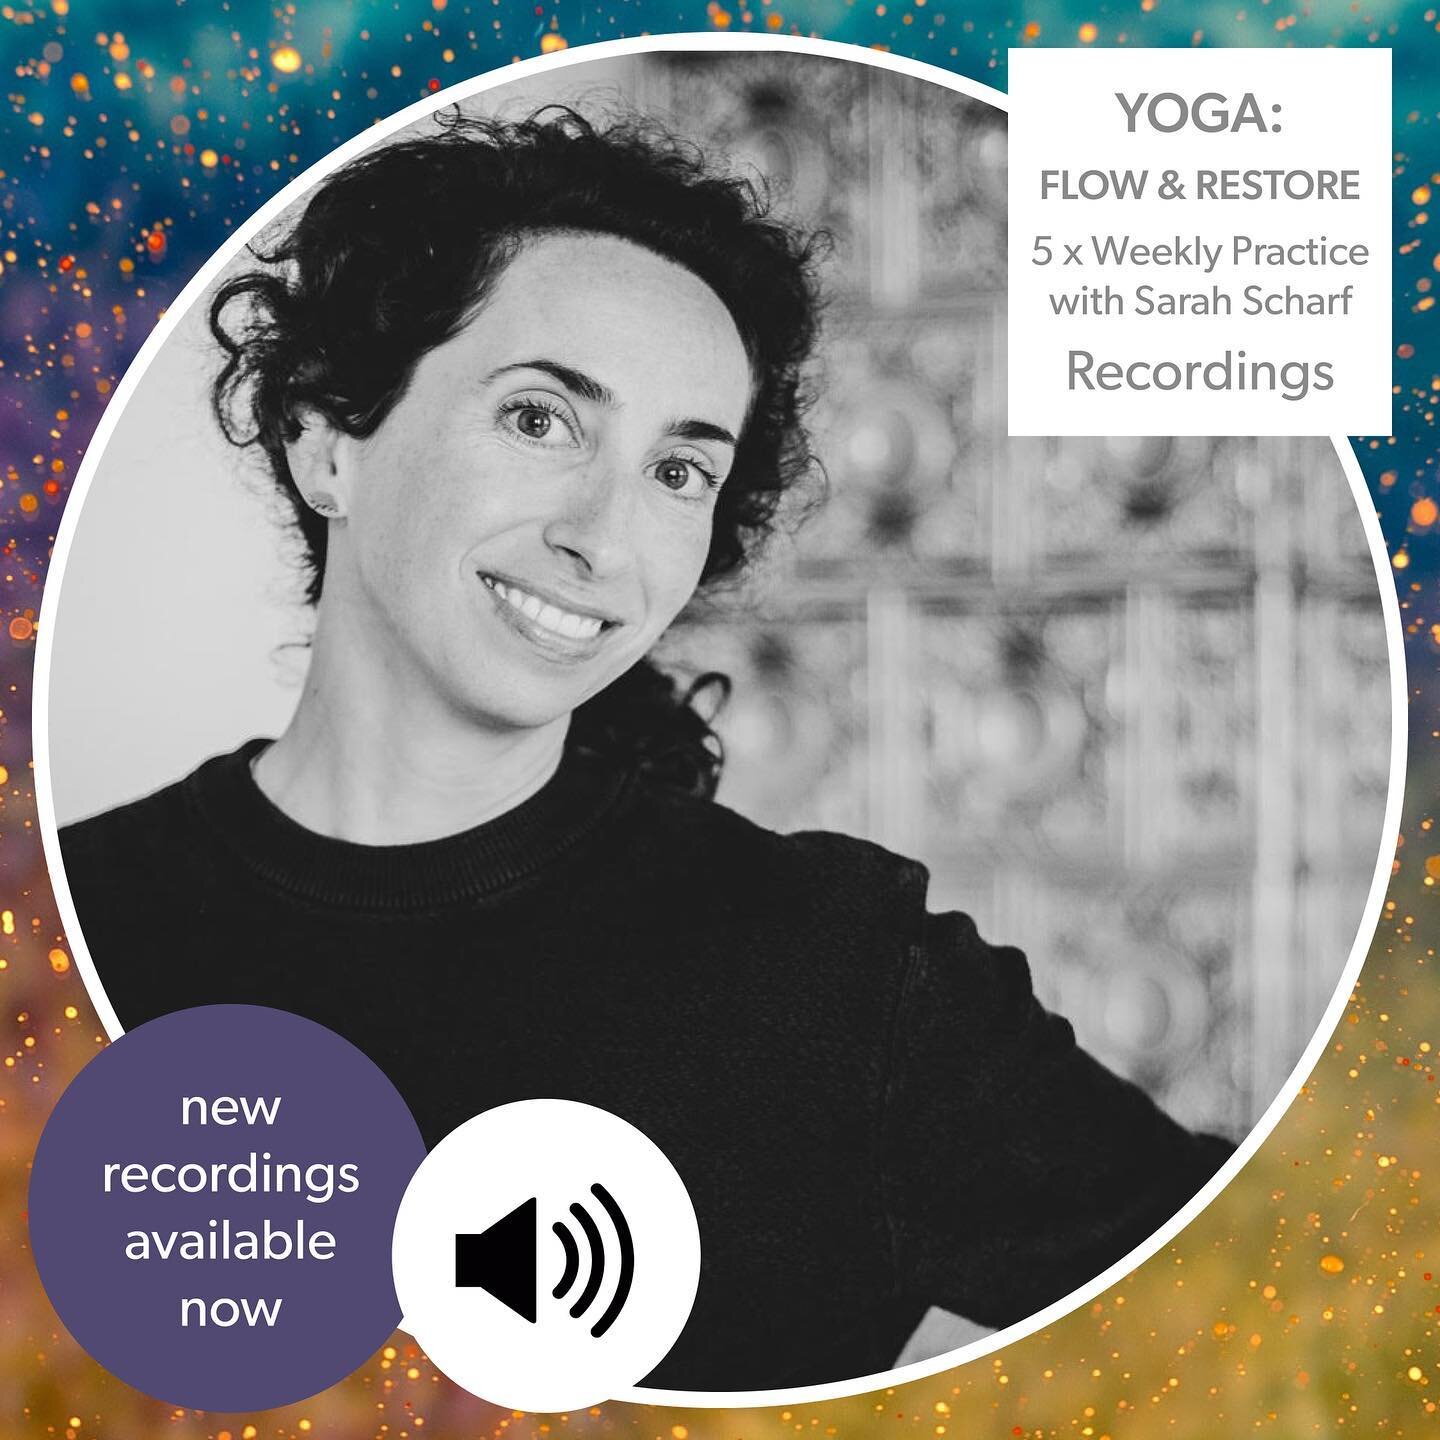 We have a great new offer for those of you who cannot make our regular &gt;&gt; YOGA: FLOW &amp; RESTORE weekly class time: five recordings of 75 minute sessions with @sarahscharfyoga, available to download &amp; do in your own time. Buy an individua